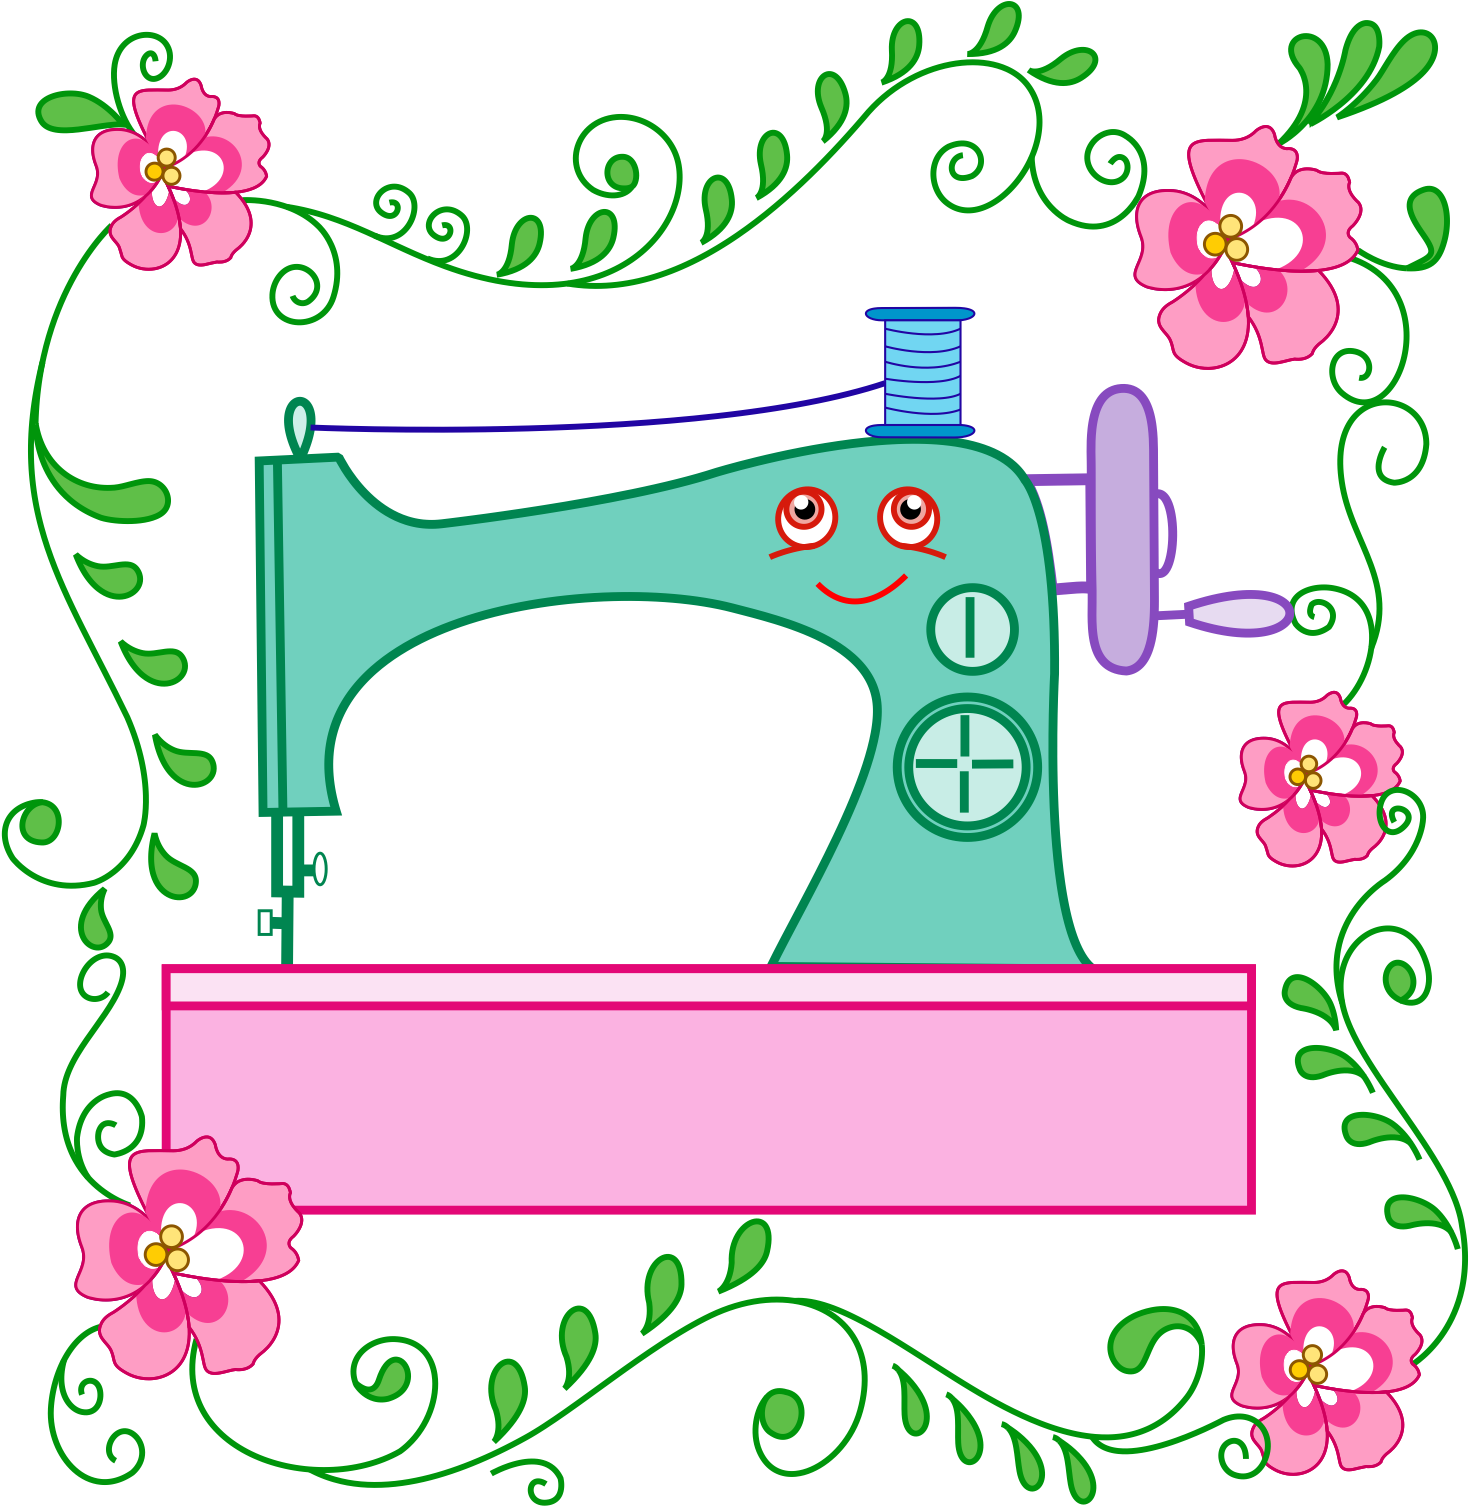 Whimsical Sewing Characters Is A Downloadable Machine - Caricatura Imagenes De Maquinas De Coser (1500x1508)